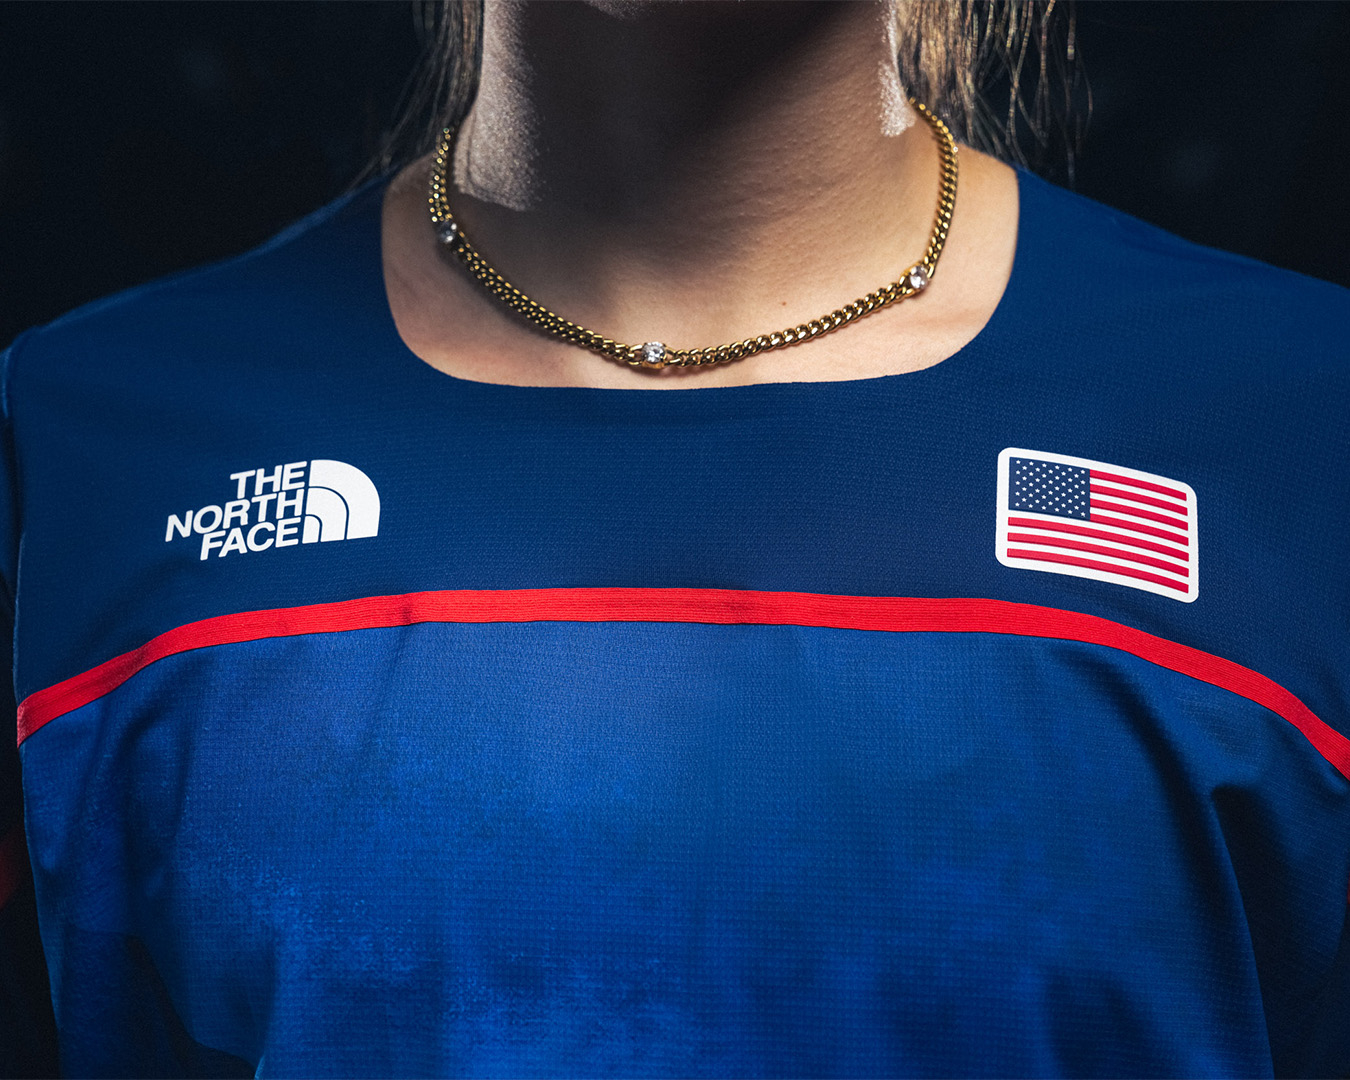 Close-up of a person&#x27;s torso wearing a The North Face top with a US flag on the right chest